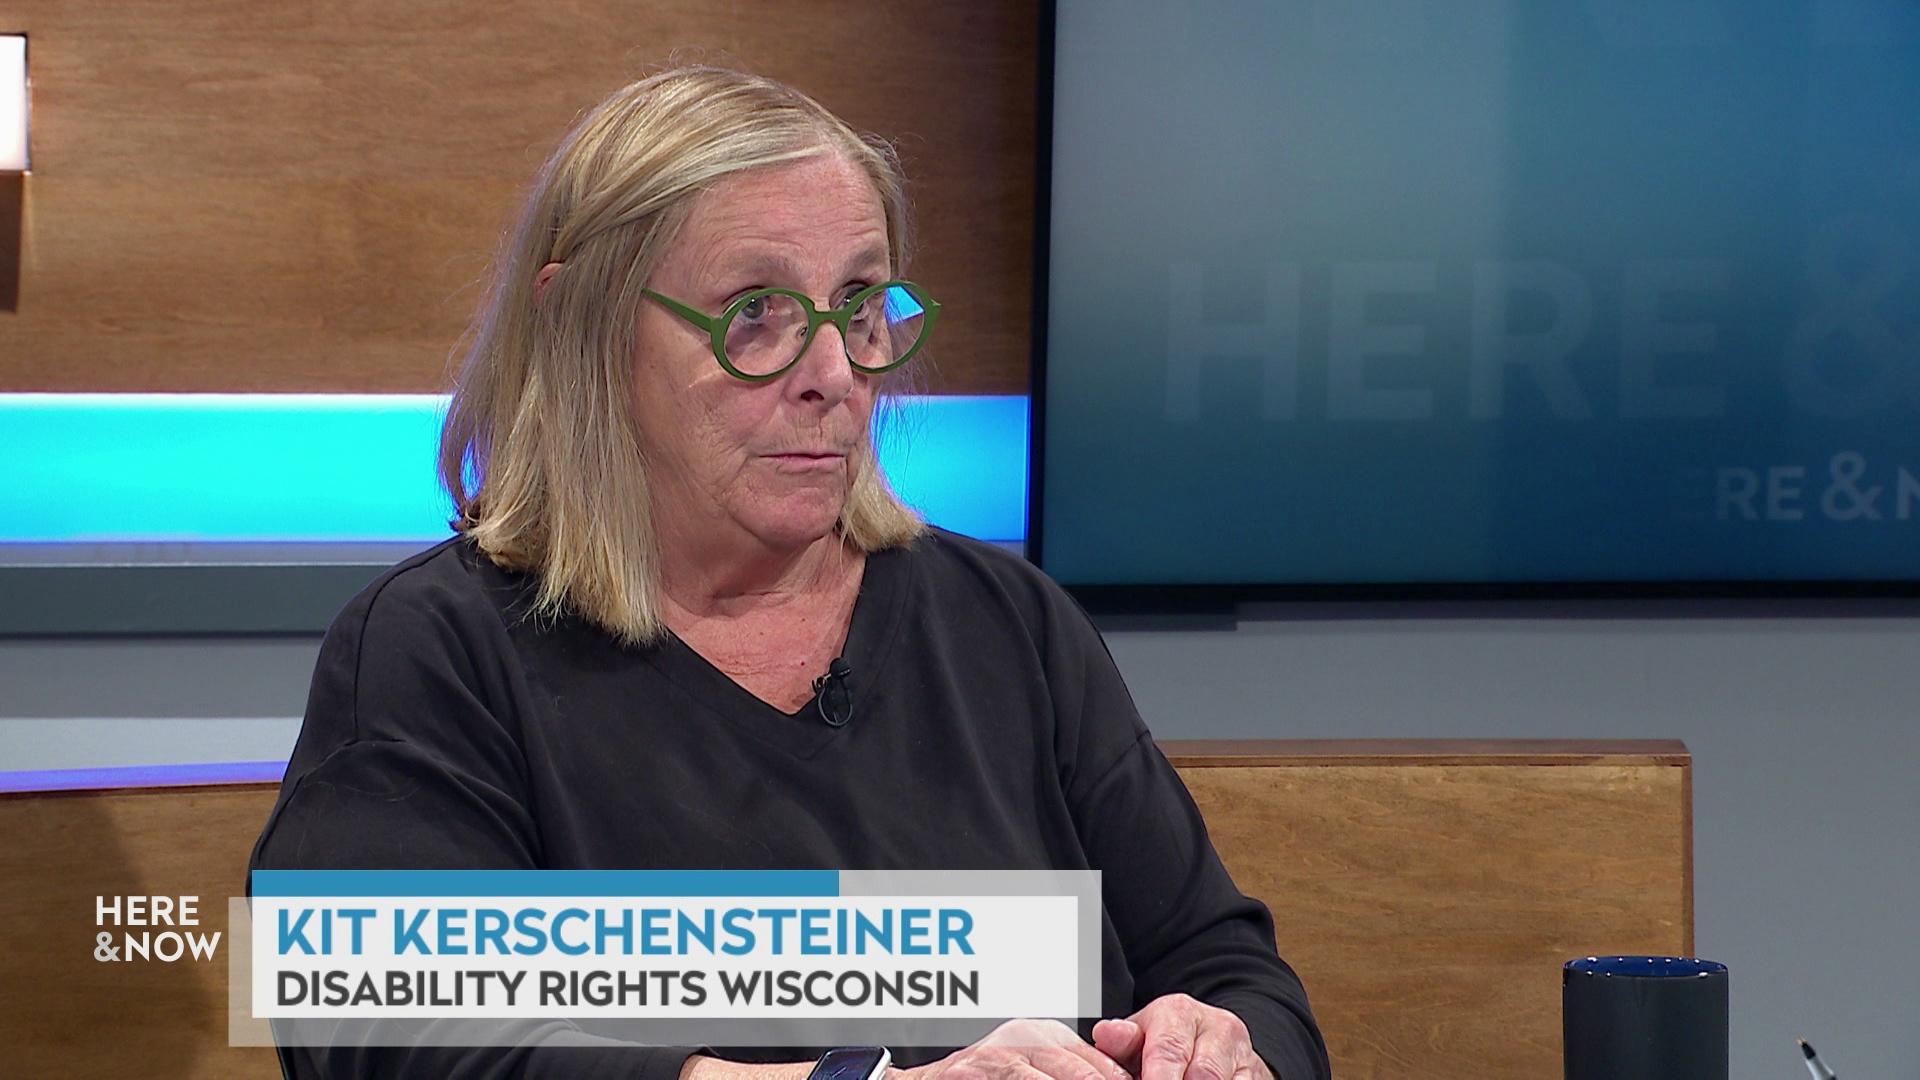 A still image shows Kit Kerchschensteiner seated at the 'Here & Now' set featuring wood paneling, with a graphic at bottom reading 'Kit Kerchschensteiner' and 'Disability Rights Wisconsin.'